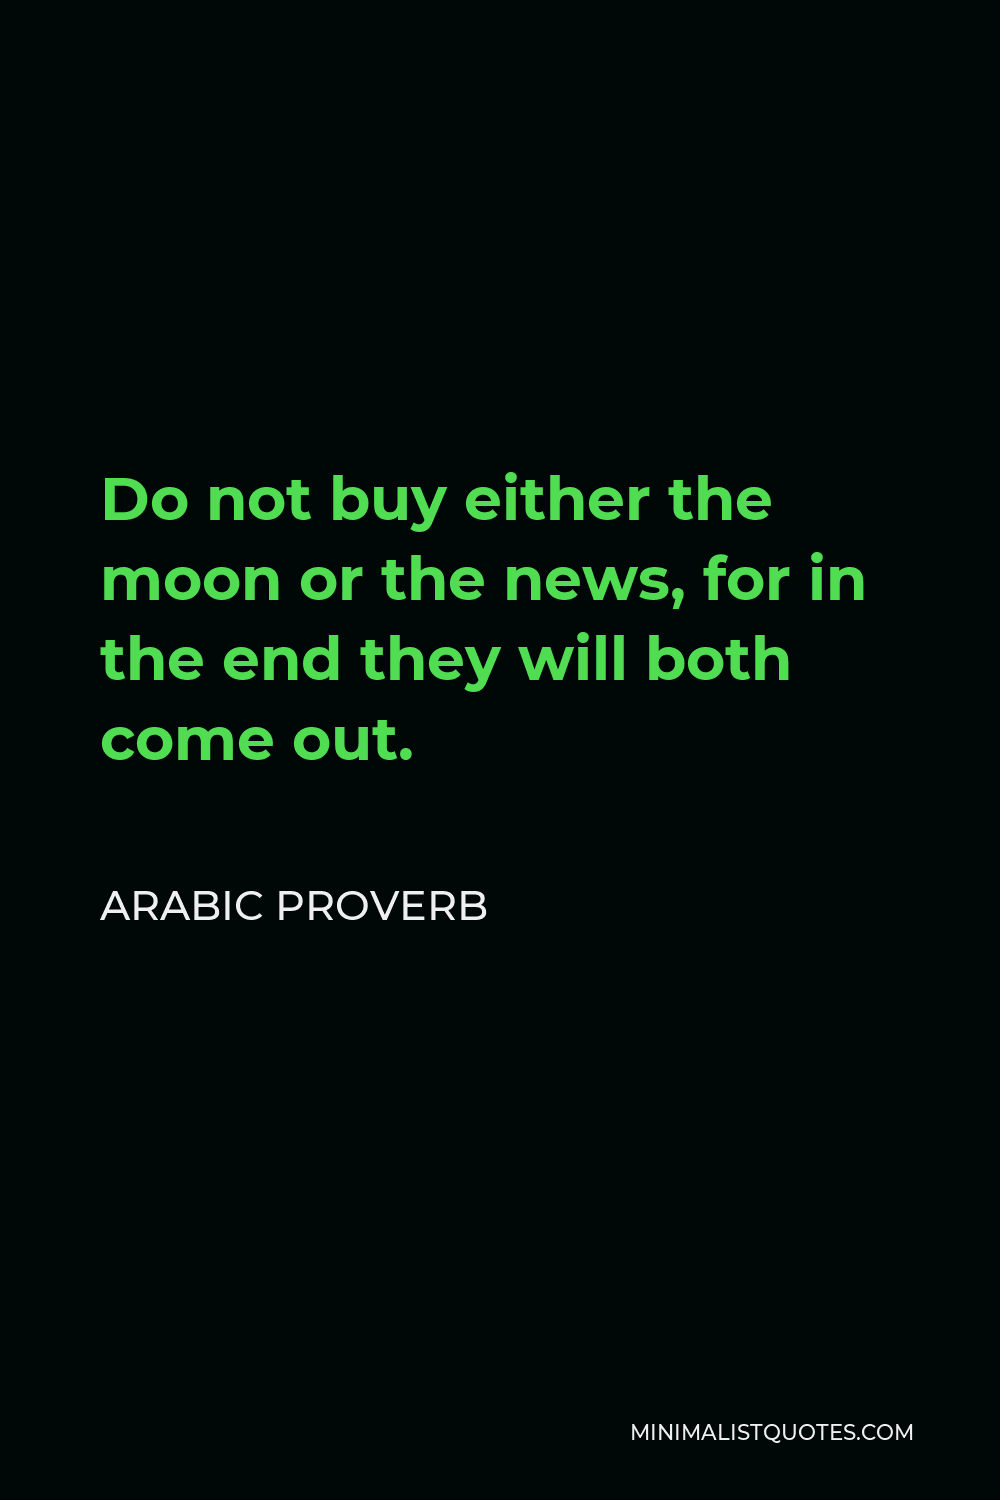 Arabic Proverb Quote - Do not buy either the moon or the news, for in the end they will both come out.